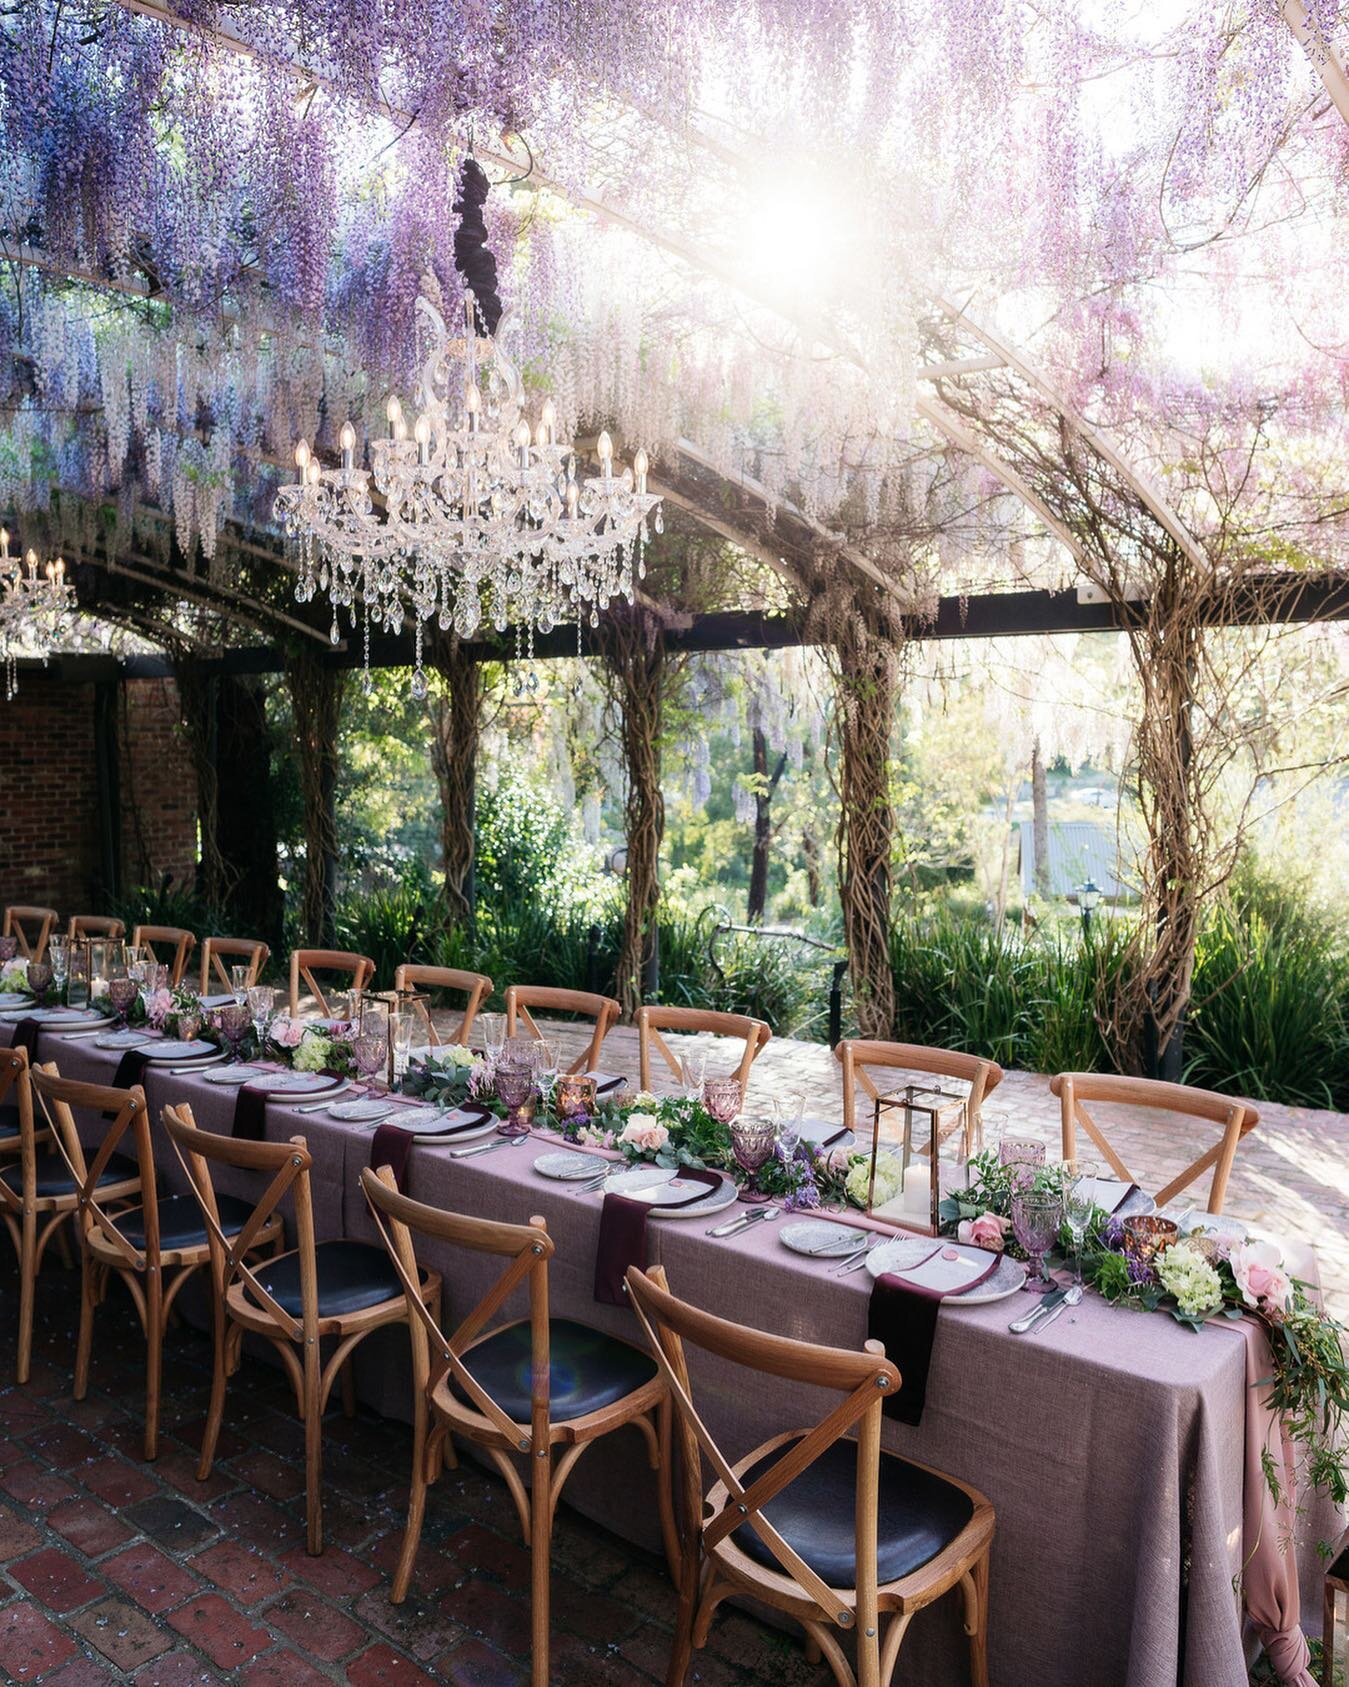 @pottersreceptions in the spring is a breathtaking sight.  Sitting beneath the blooming wisteria as the sun creeps in is an enchanting experience. I&rsquo;m already dreaming of those nights. 
.
.
.
.
Chandeliers @actioneventstheming 
Photography @ric